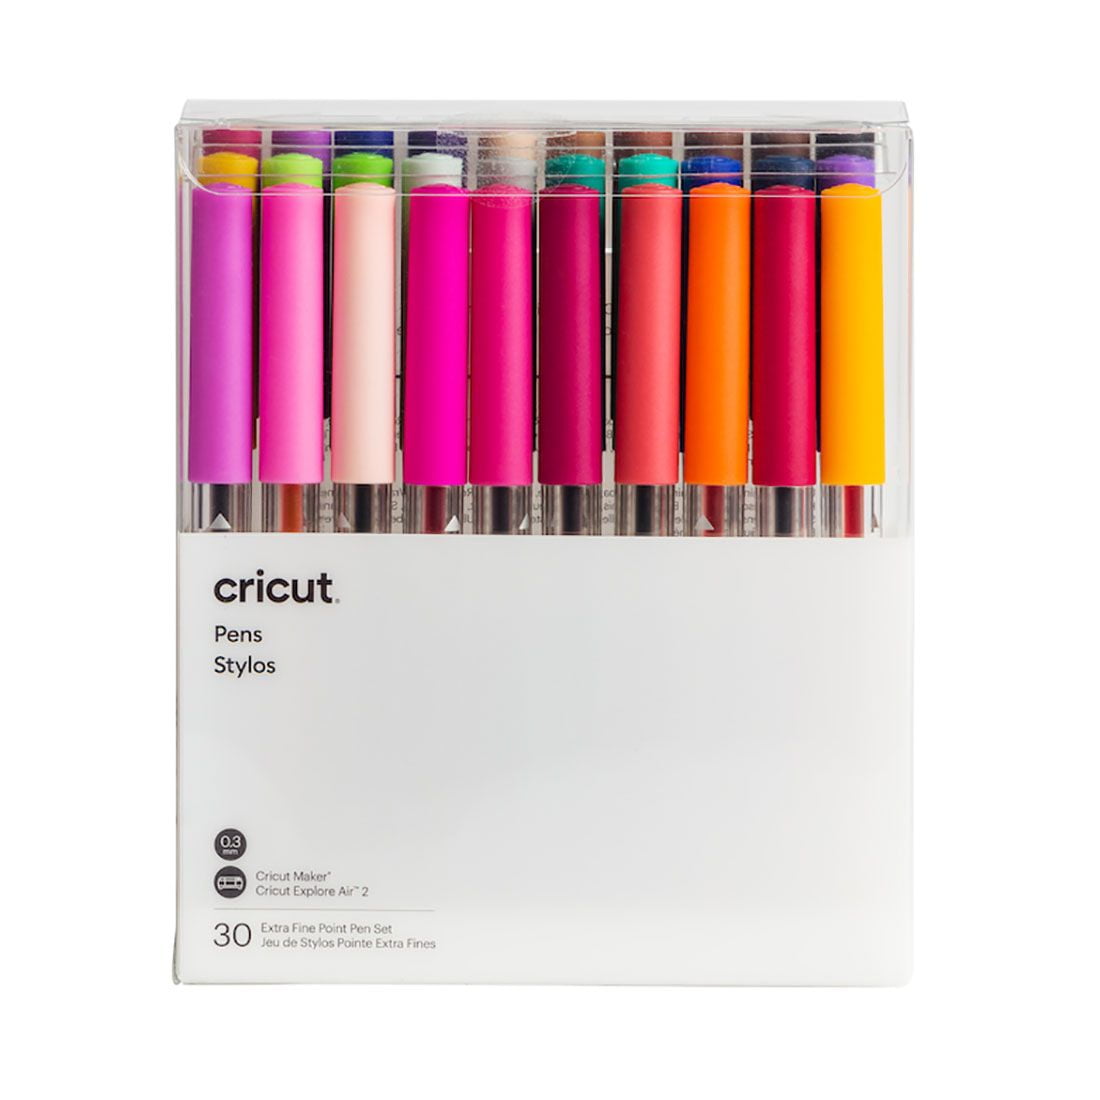  Cricut Ultimate Fine Point Pen Set, 0.4mm Fine Tip Pens to  Write, Draw & Color, Create Personalized Cards & Invites, Use with Cricut  Maker and Explore Cutting Machines, 30 Assorted Colored